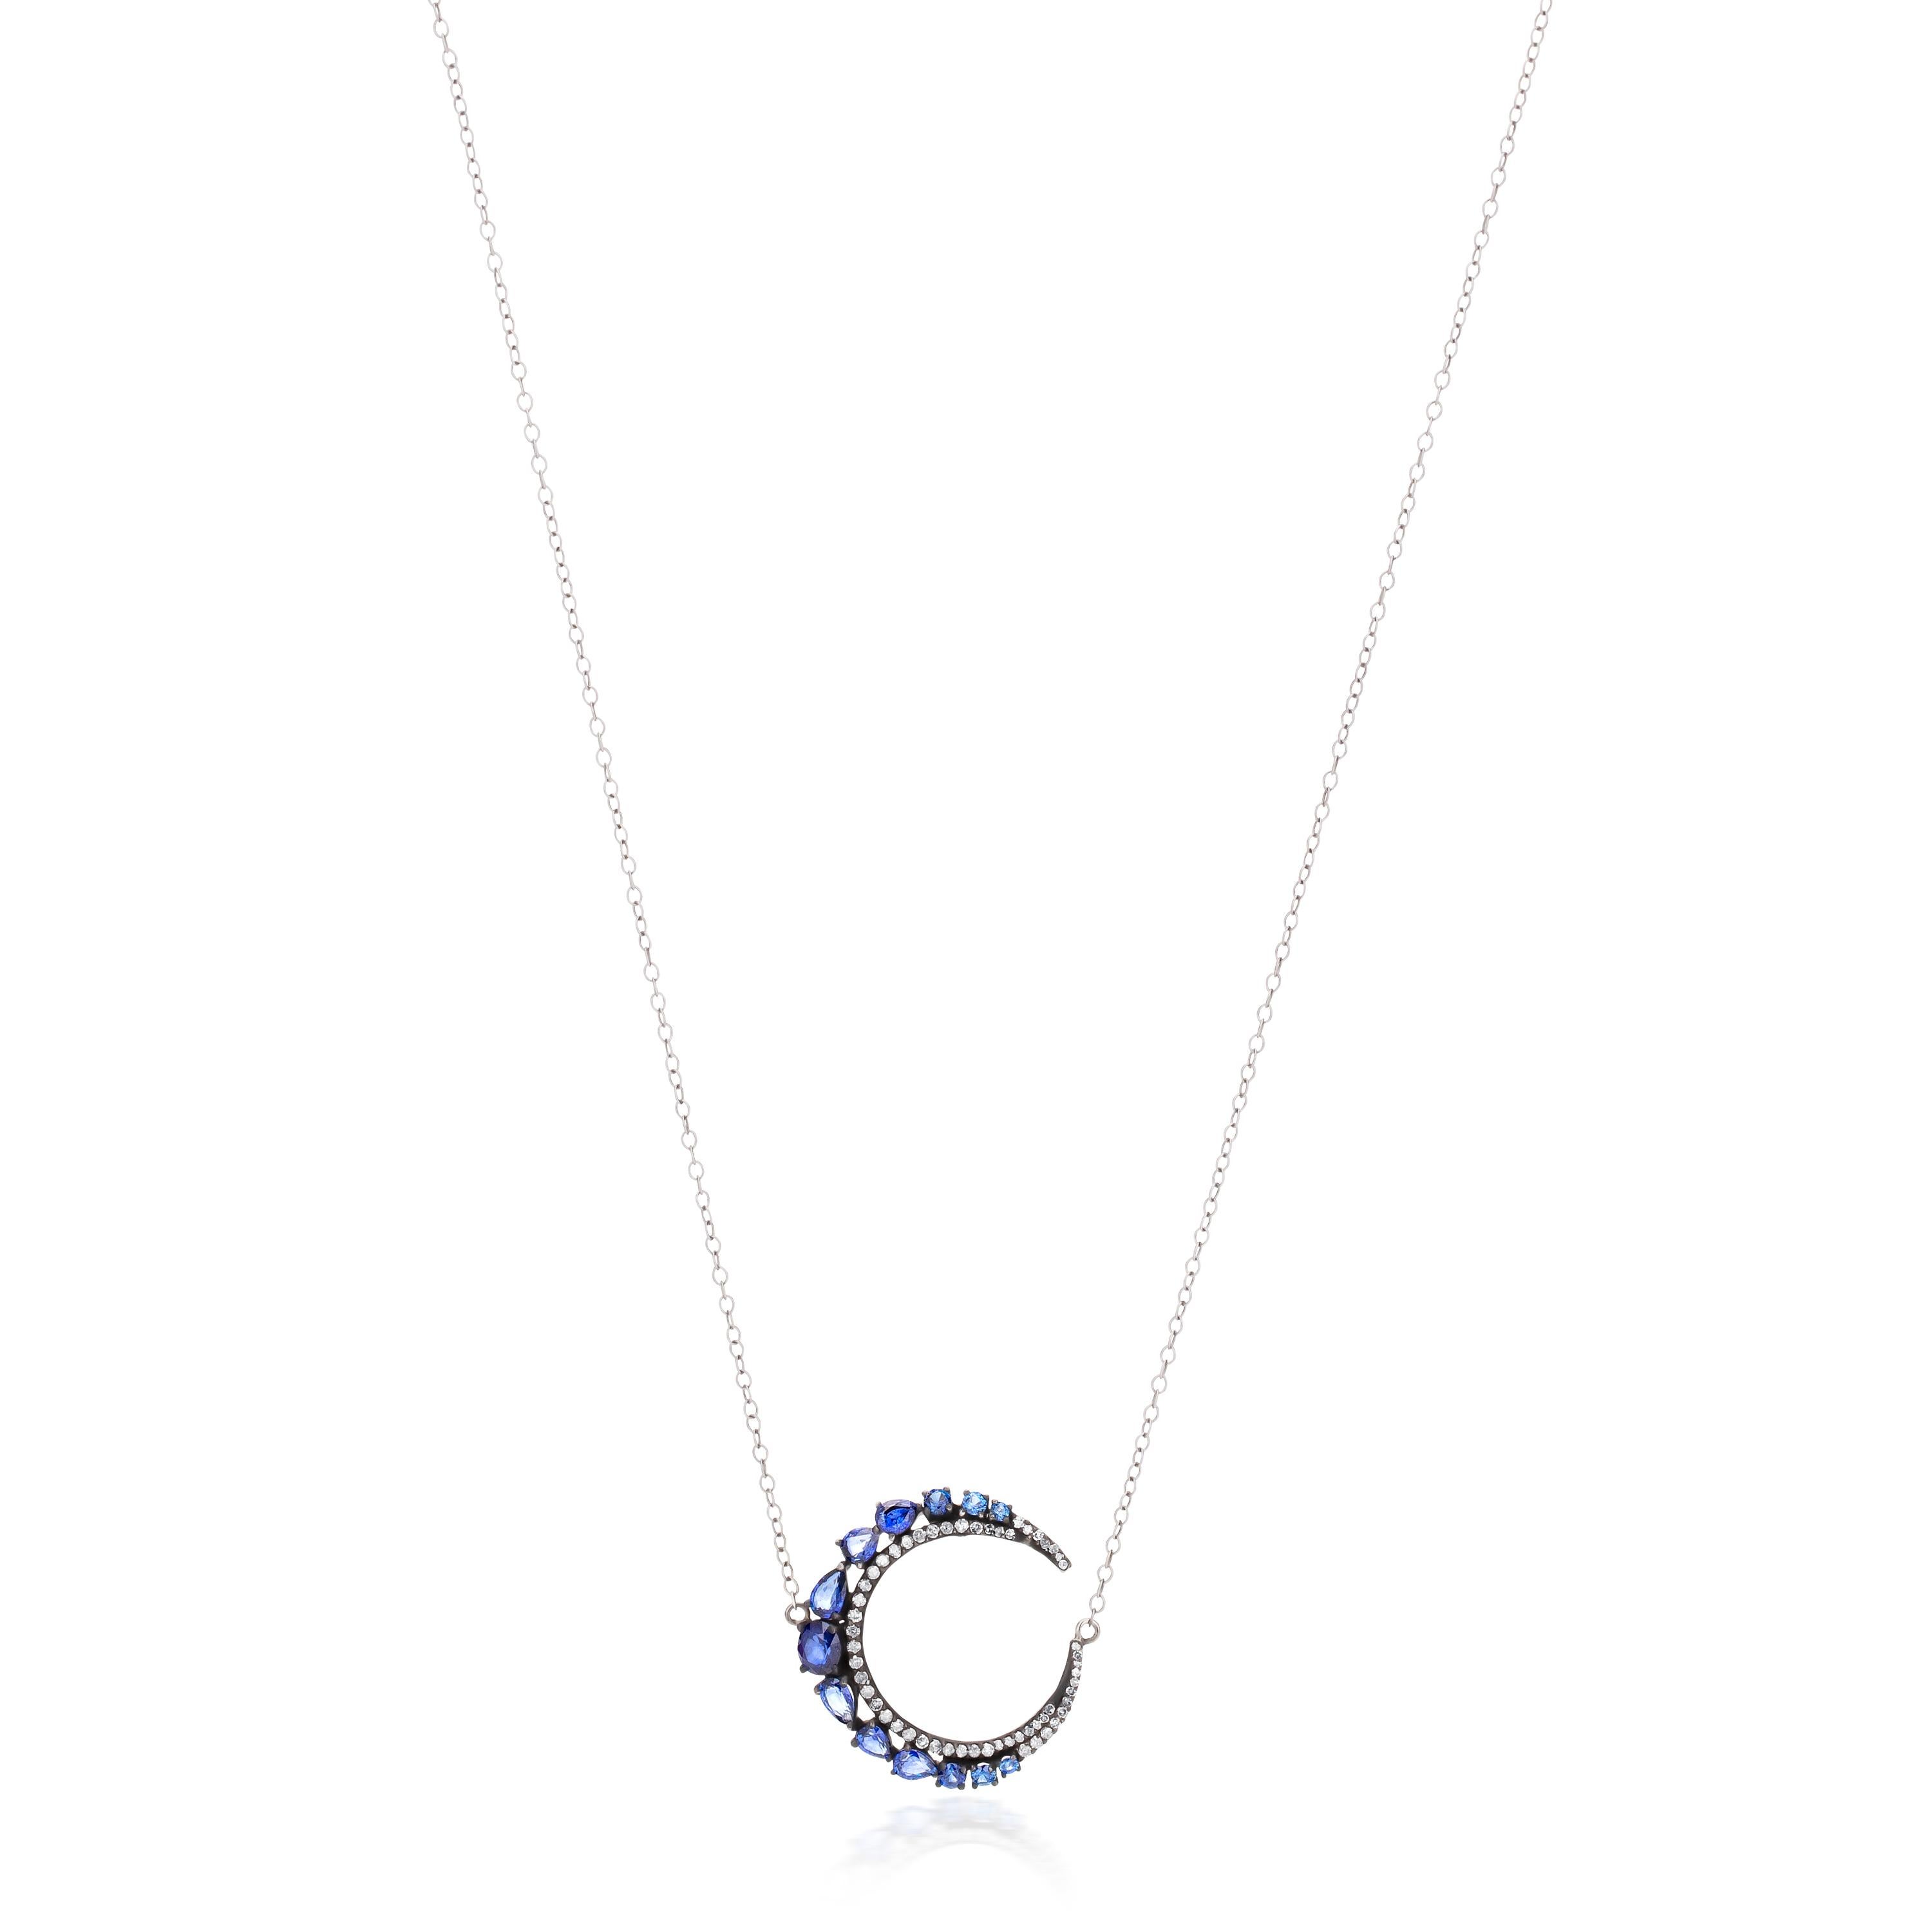 Charms of the moon! A Victorian blue sapphire and diamond crescent pendant, set with round and pear, faceted blue sapphire, on top of a crescent row of pave set round diamonds mounted on 925 sterling silver and 18k gold. The pendant is stationed